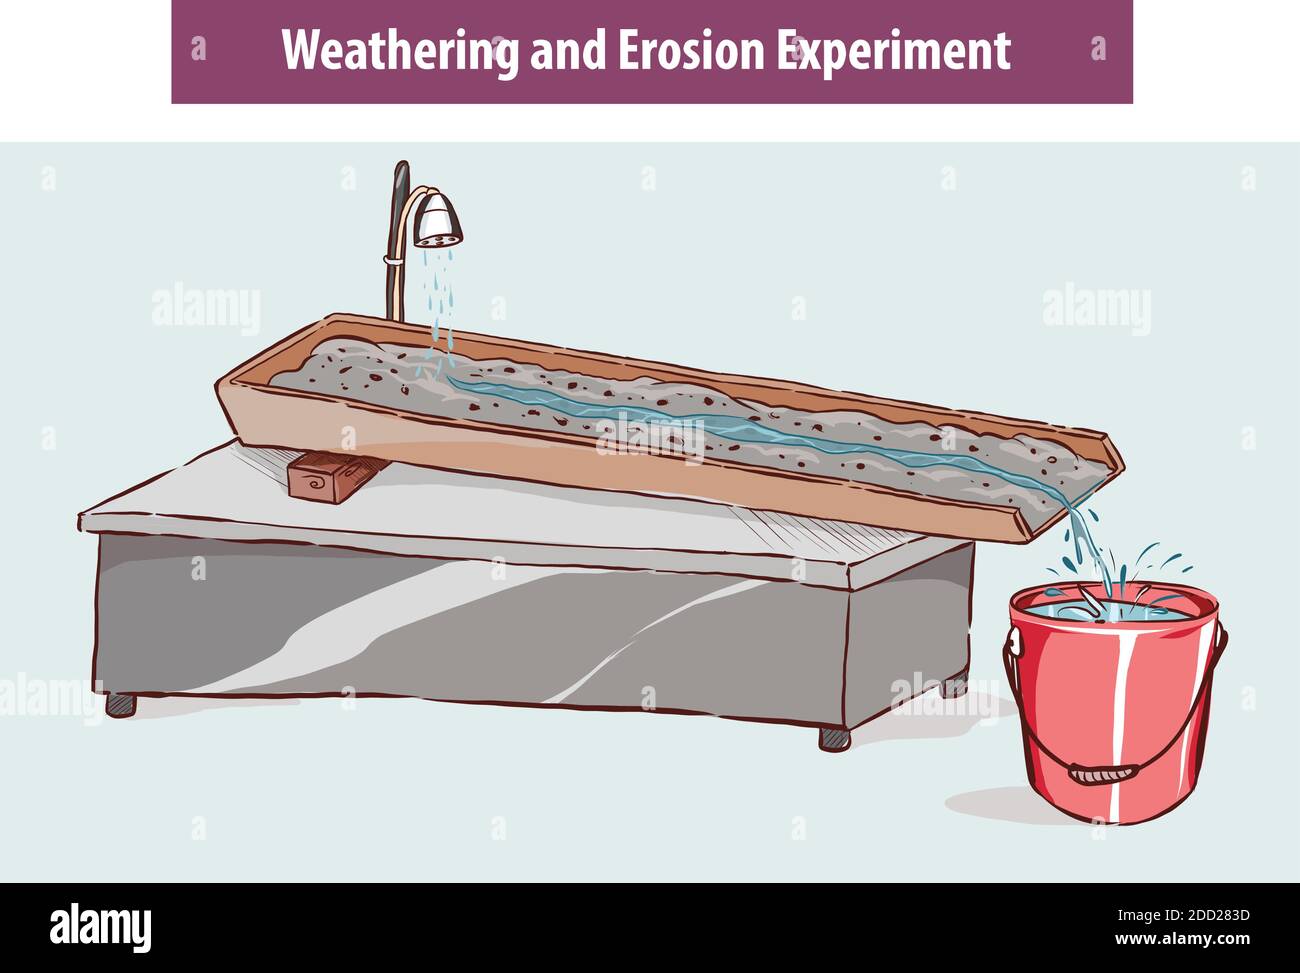 Weathering and erosion experiment vector illustration Stock Vector